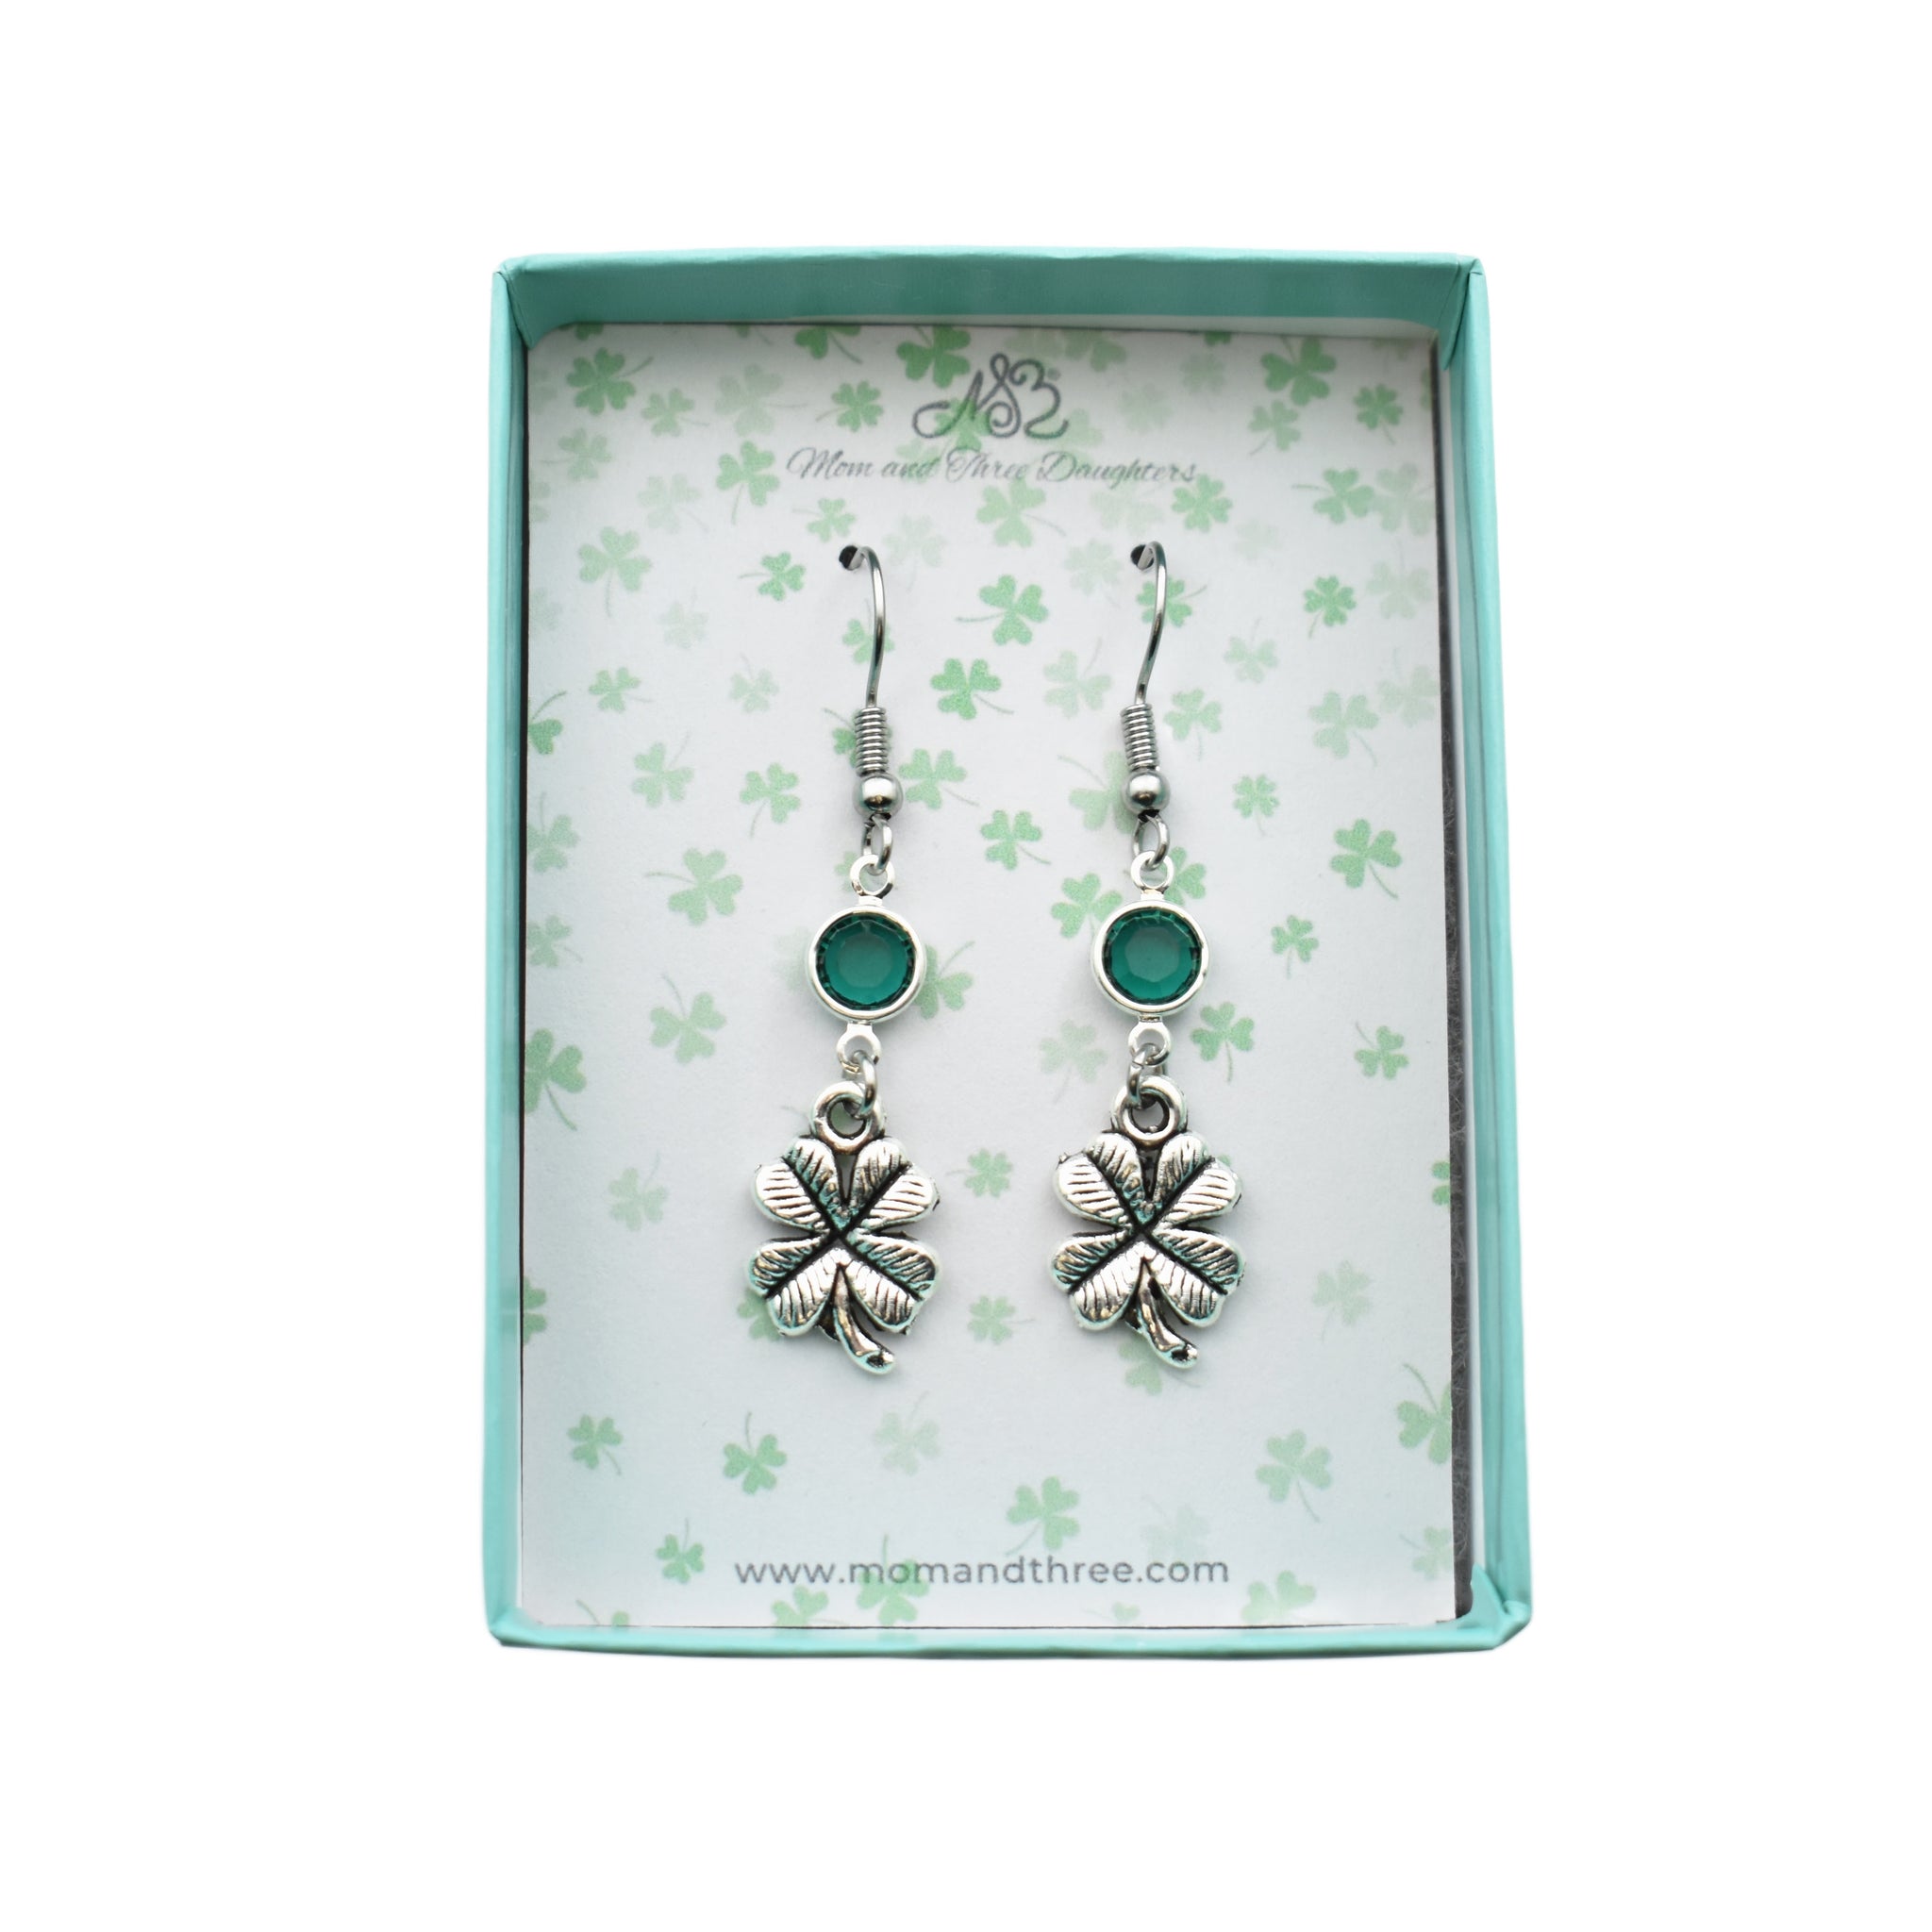 Silver Four Leaf Clover Earrings With Green Accent Charm.  Earrings hypoallergenic dangle.  St. Patrick's Day Earrings.